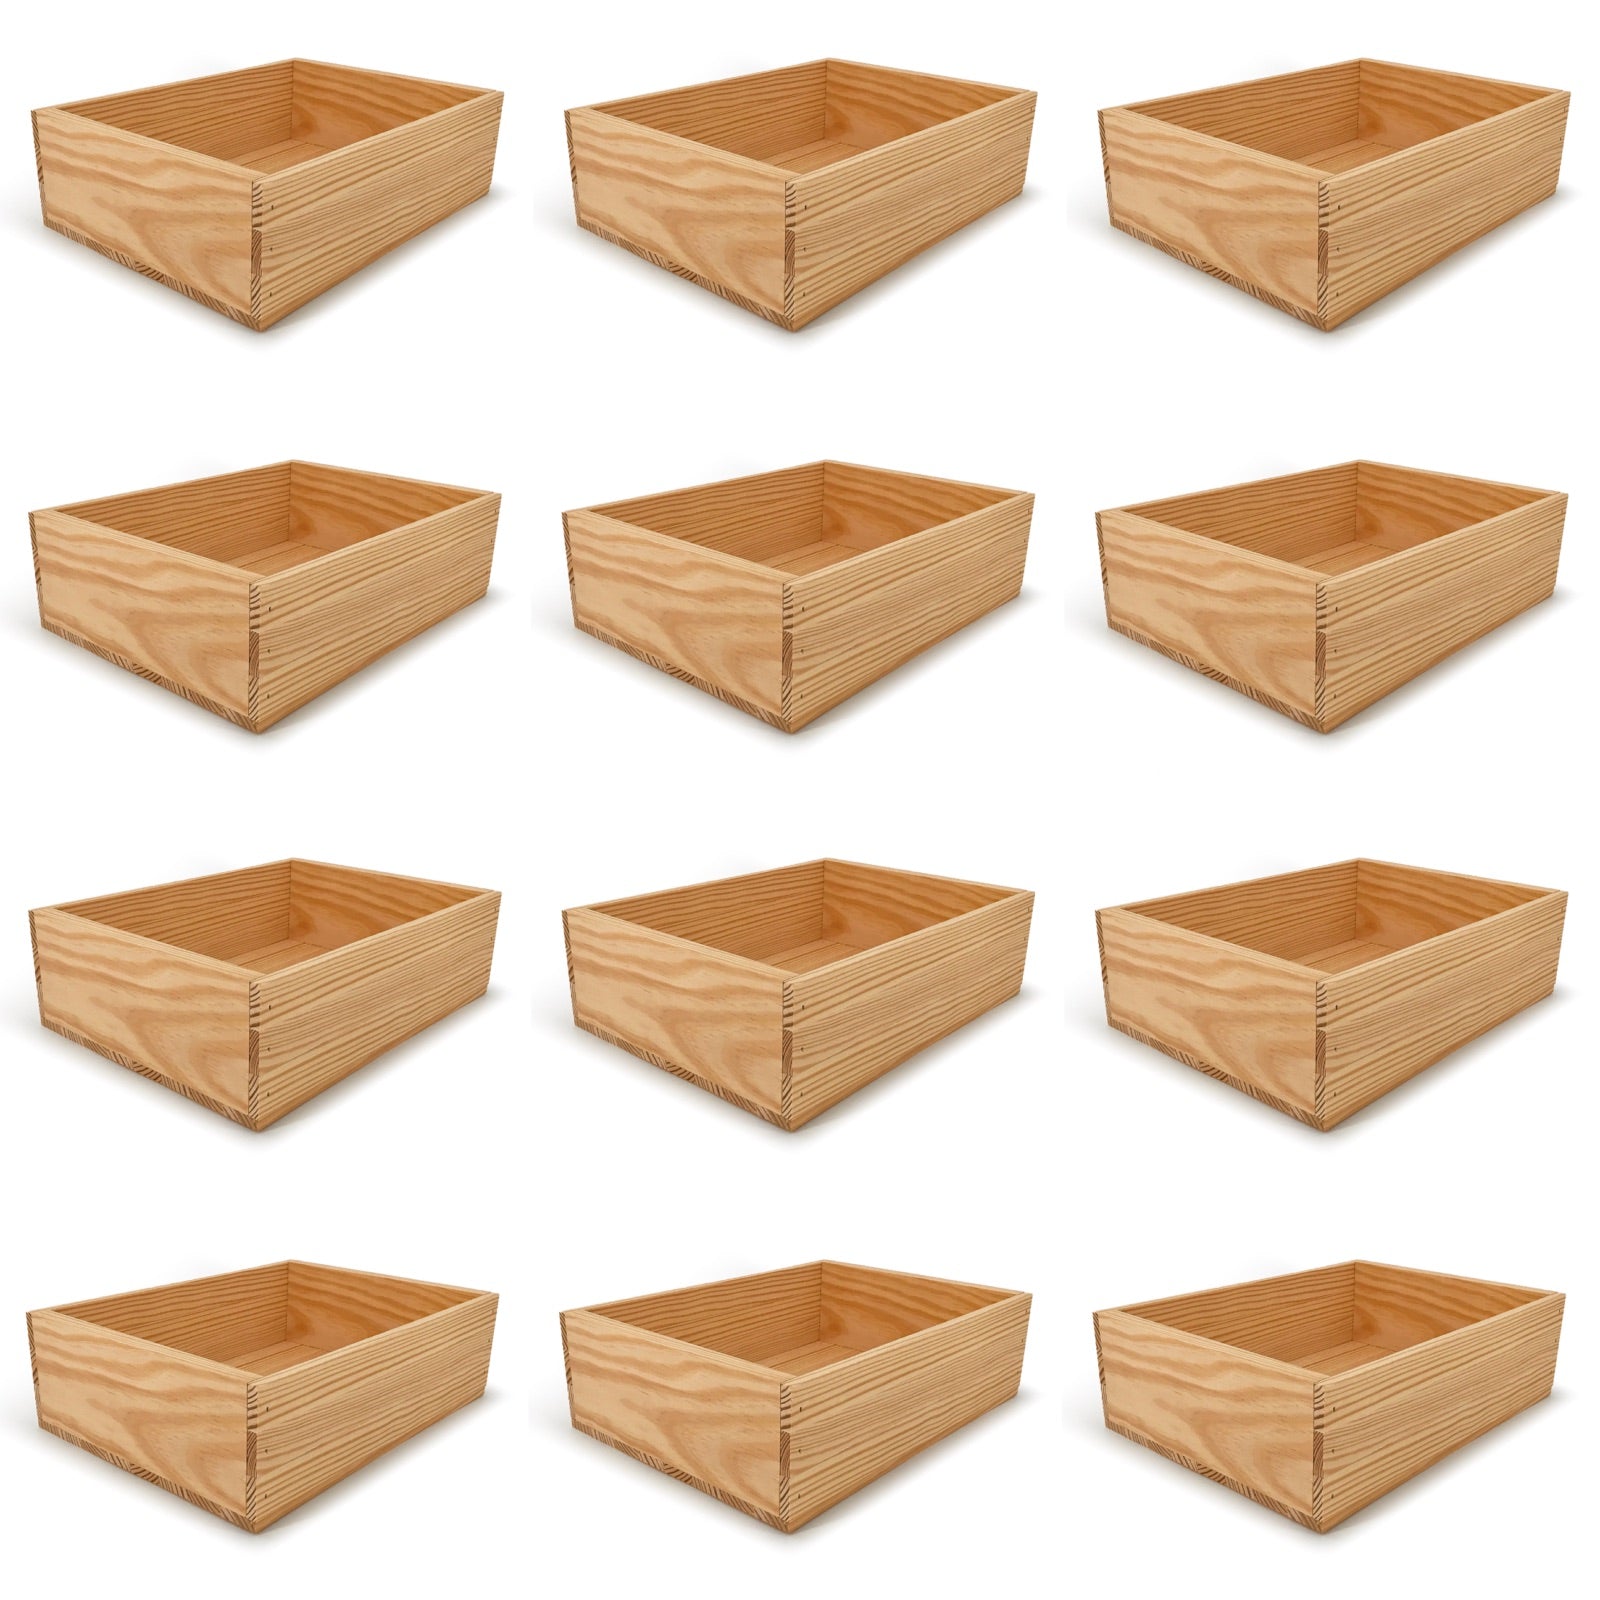 12 Small wooden crates 14x10x4.25